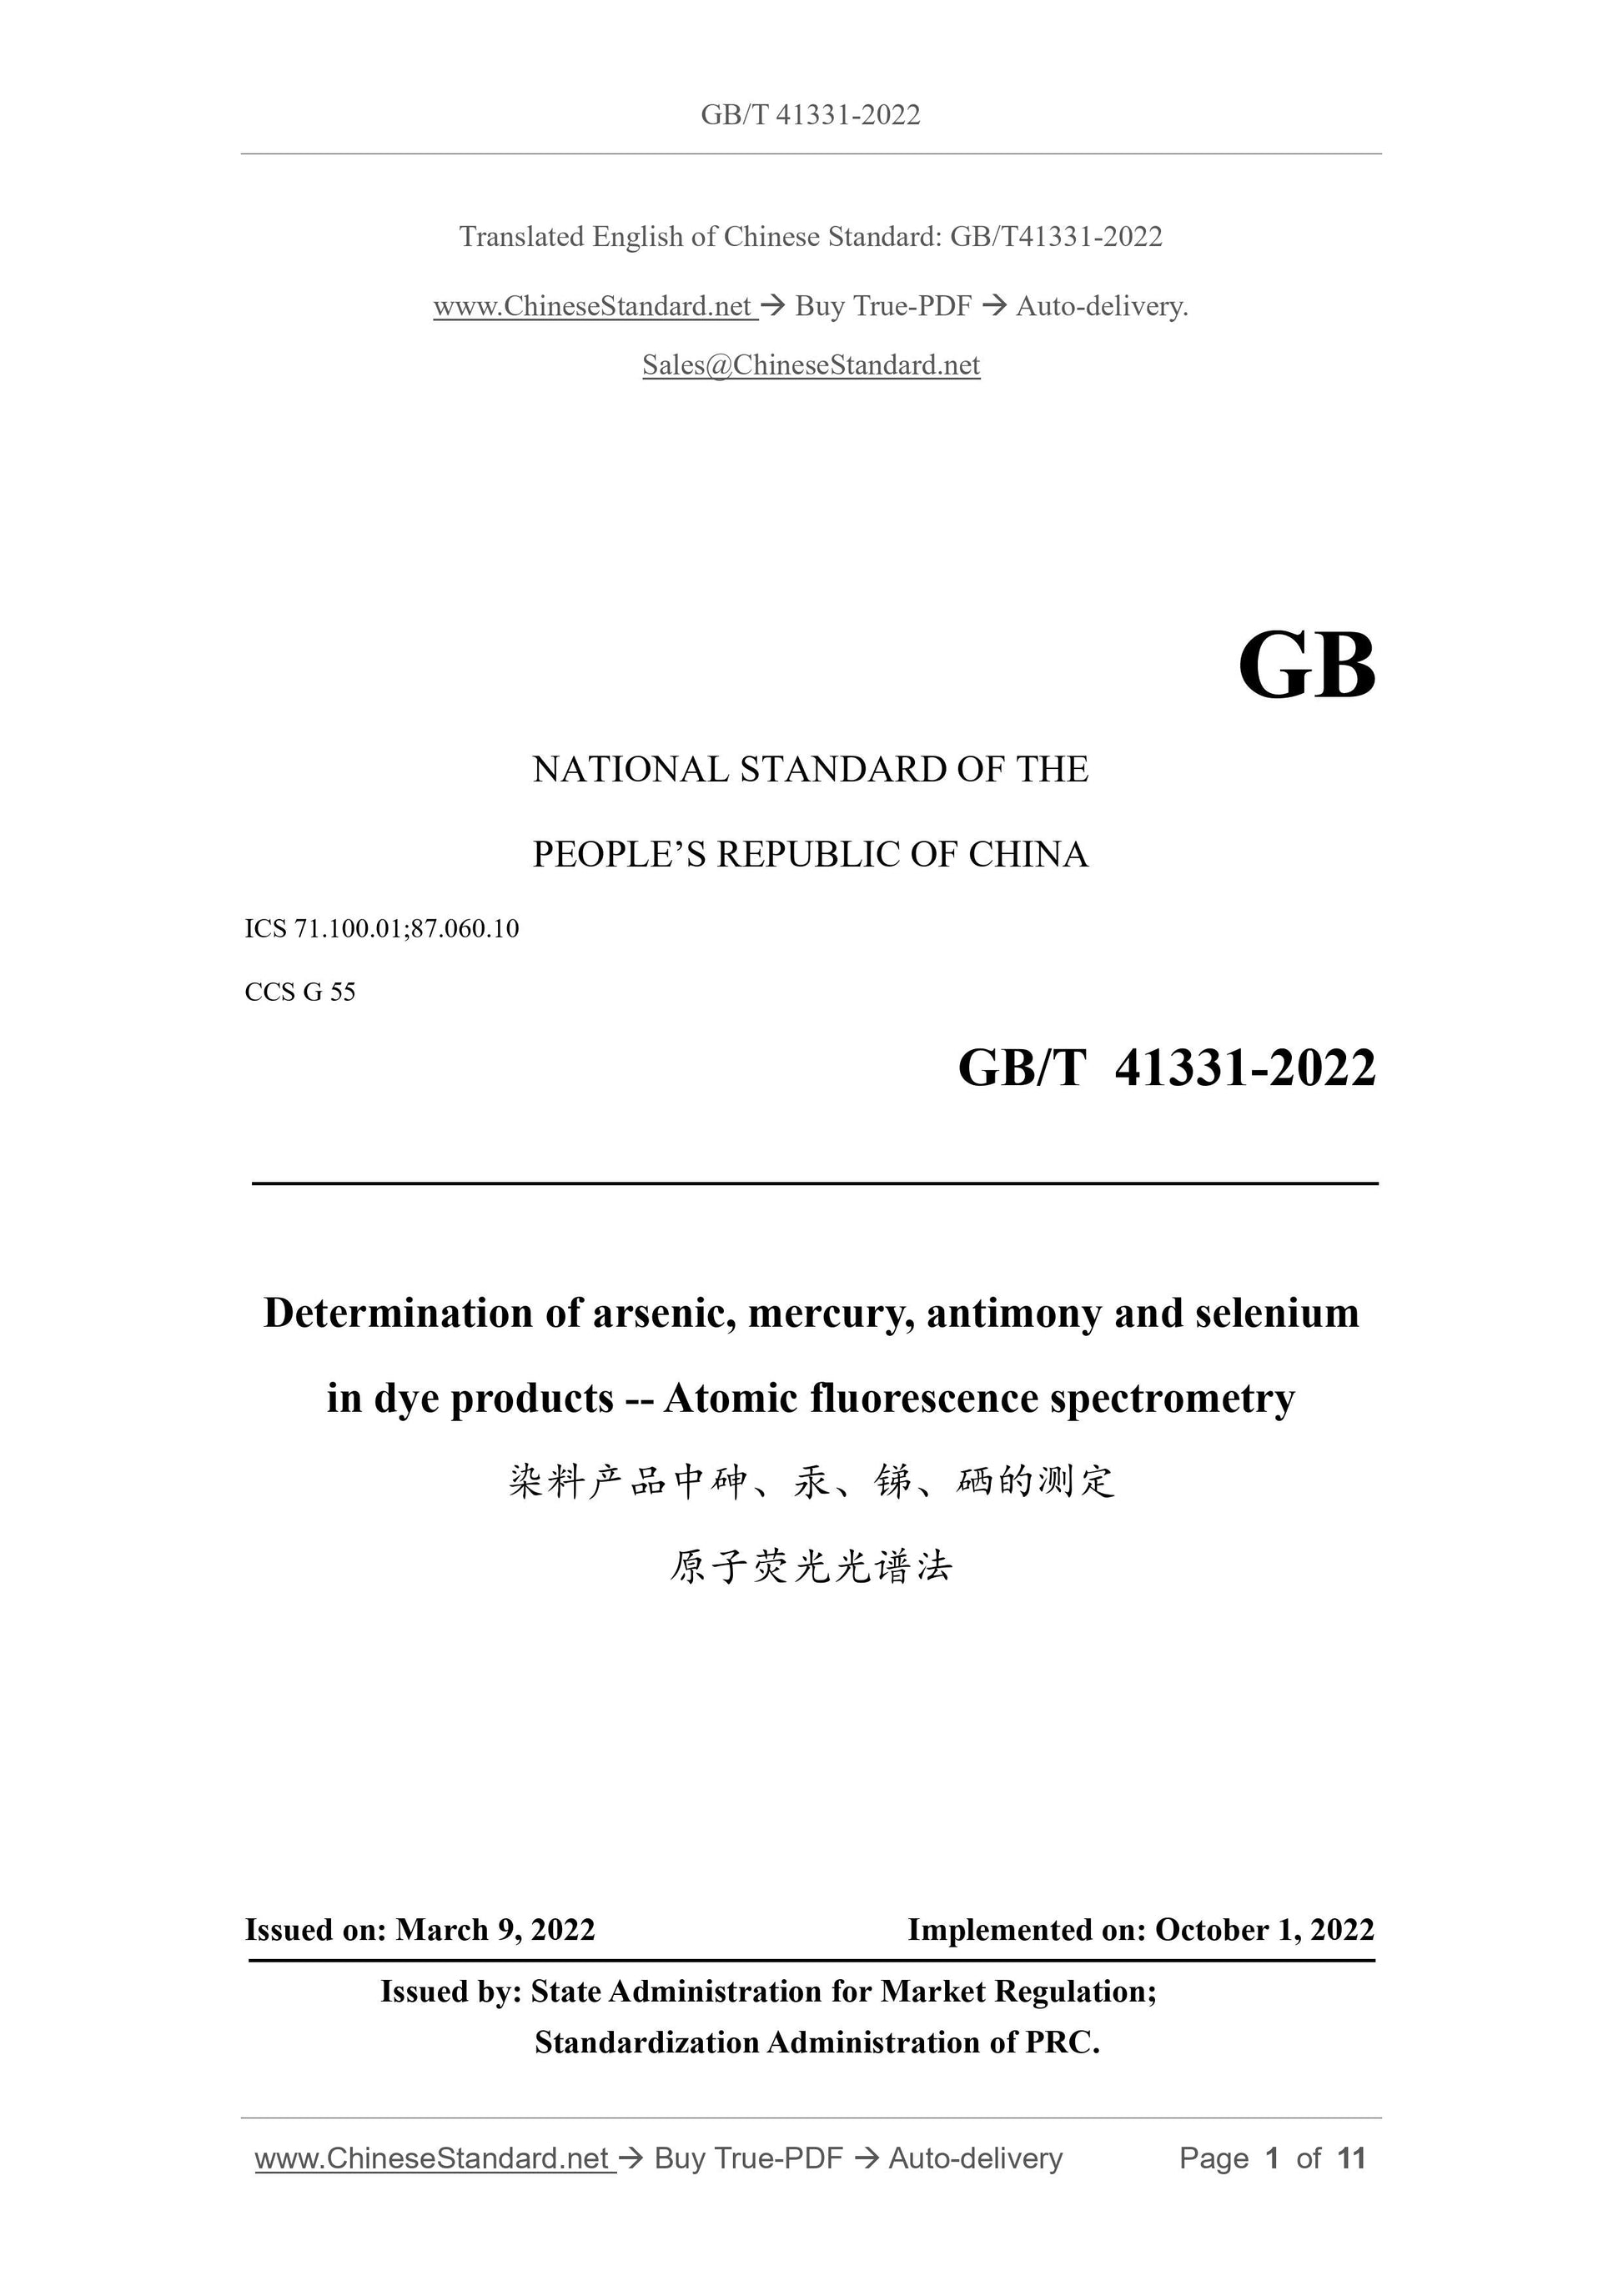 GB/T 41331-2022 Page 1